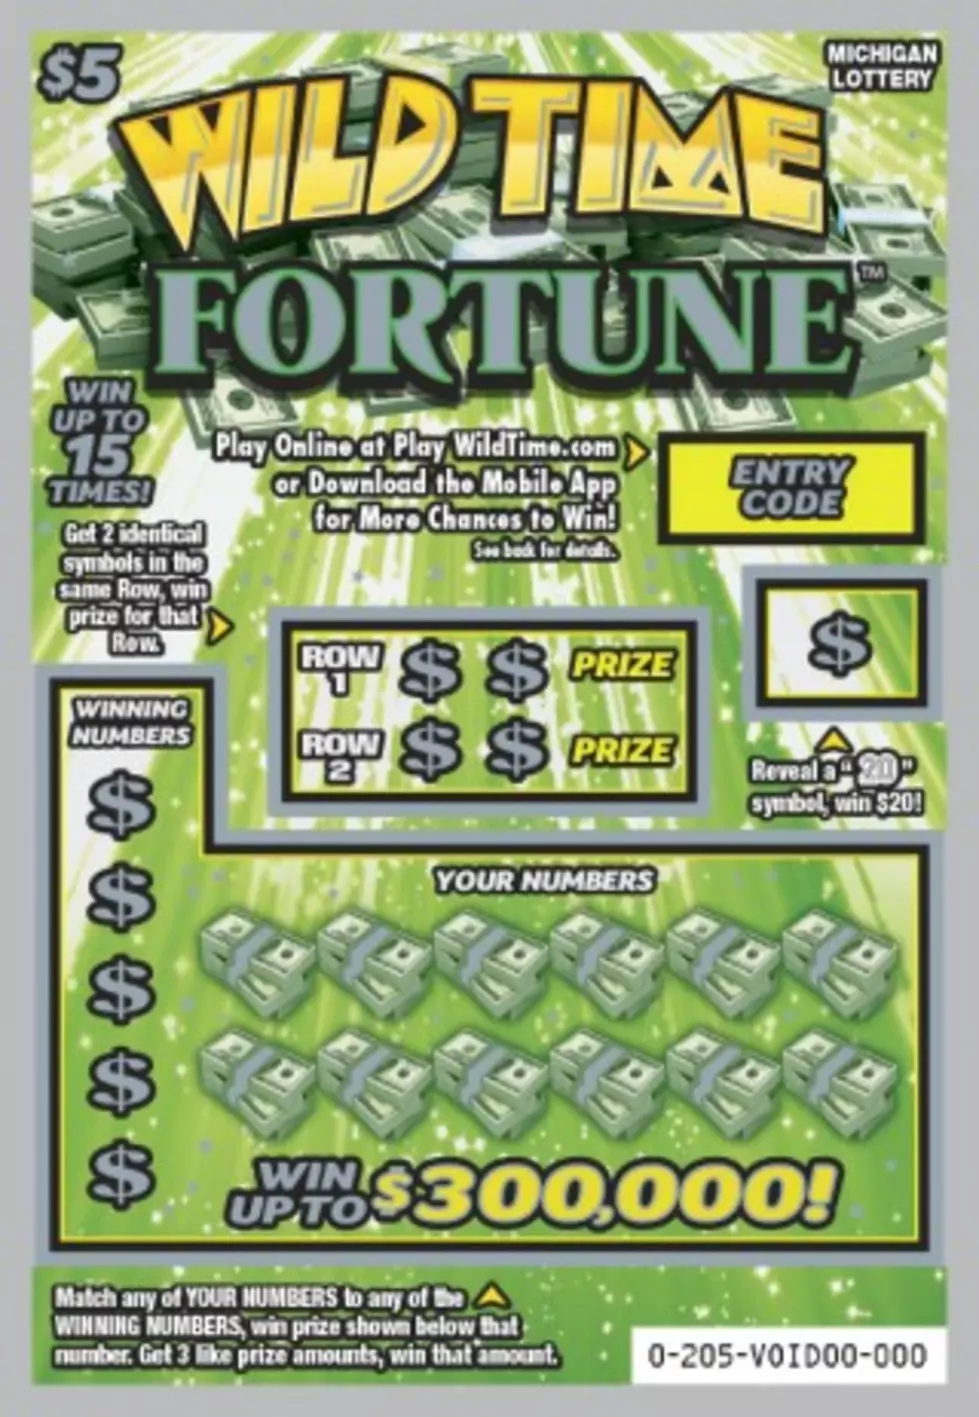 Score Wild Time Fortune Lottery Tickets From Michigan Lottery